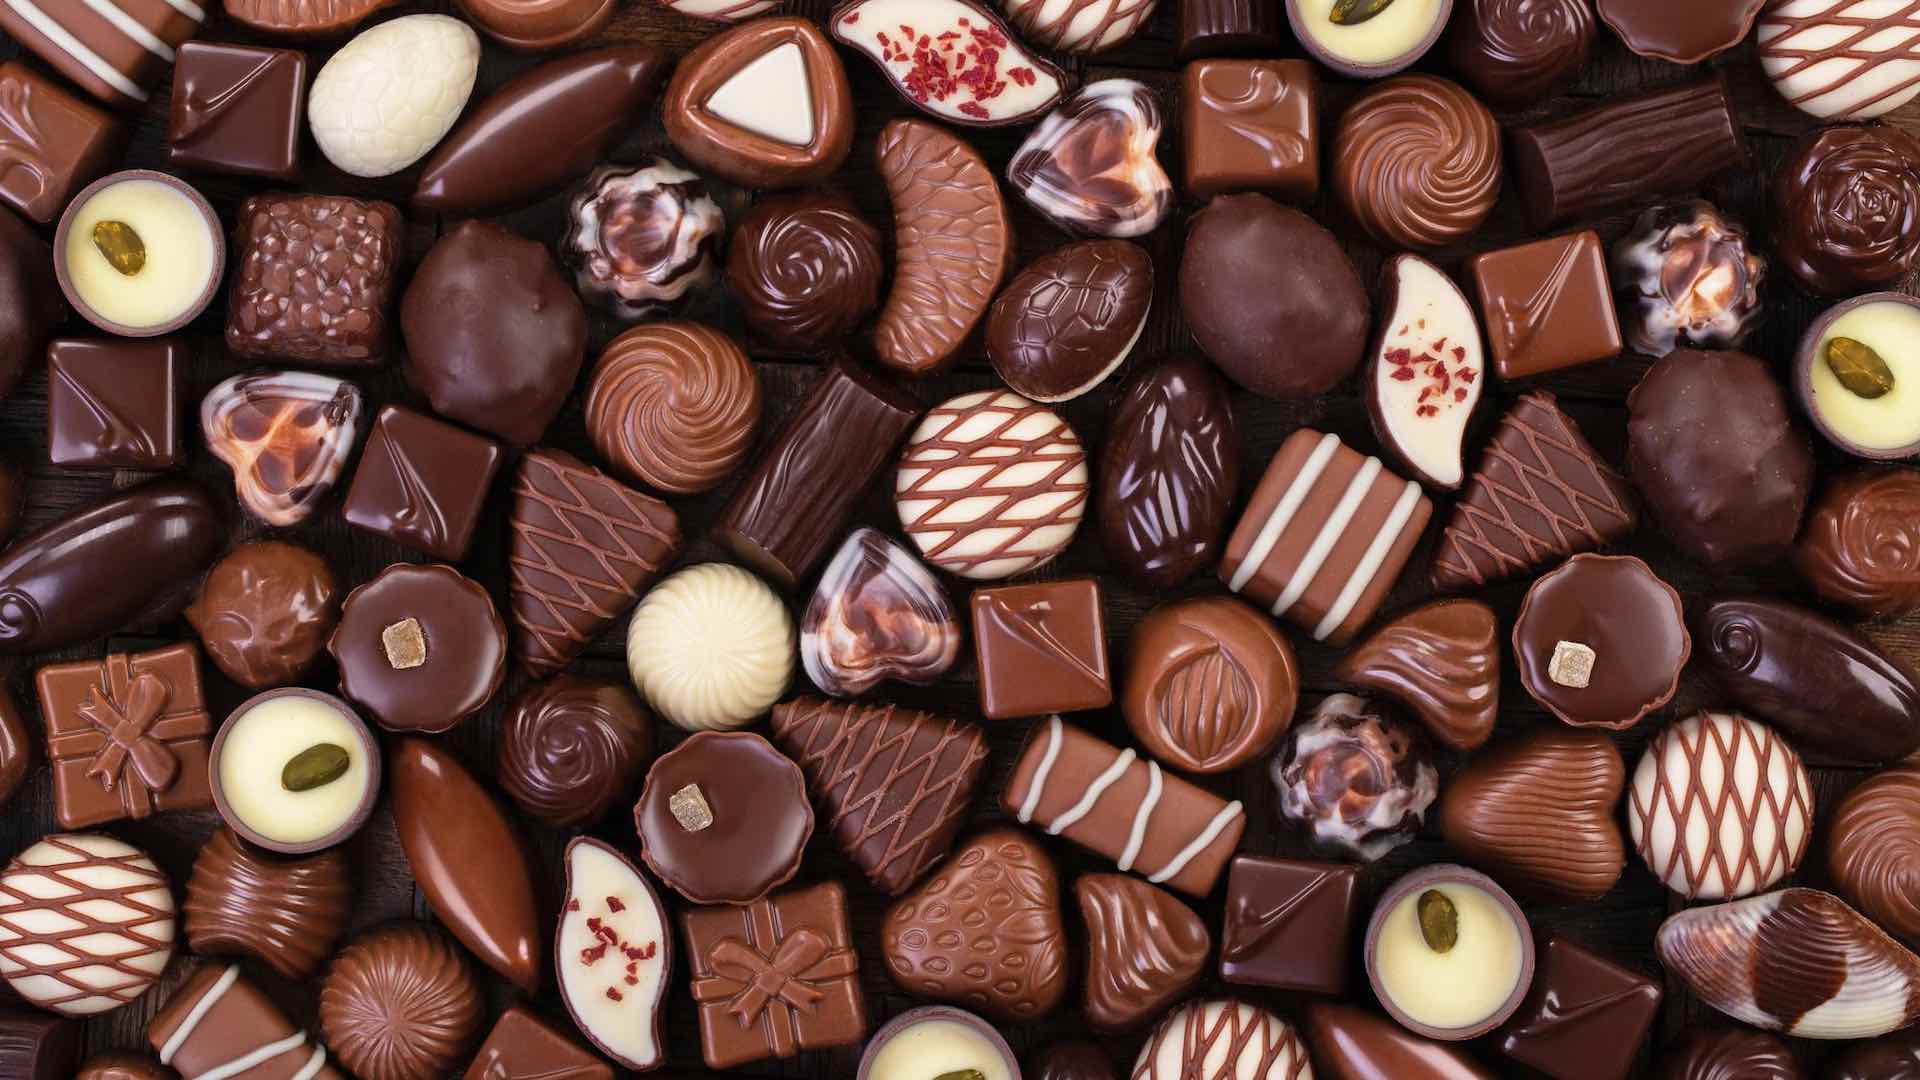 Hershey under scrutiny following Consumer Reports' findings on chocolate's heavy metal content